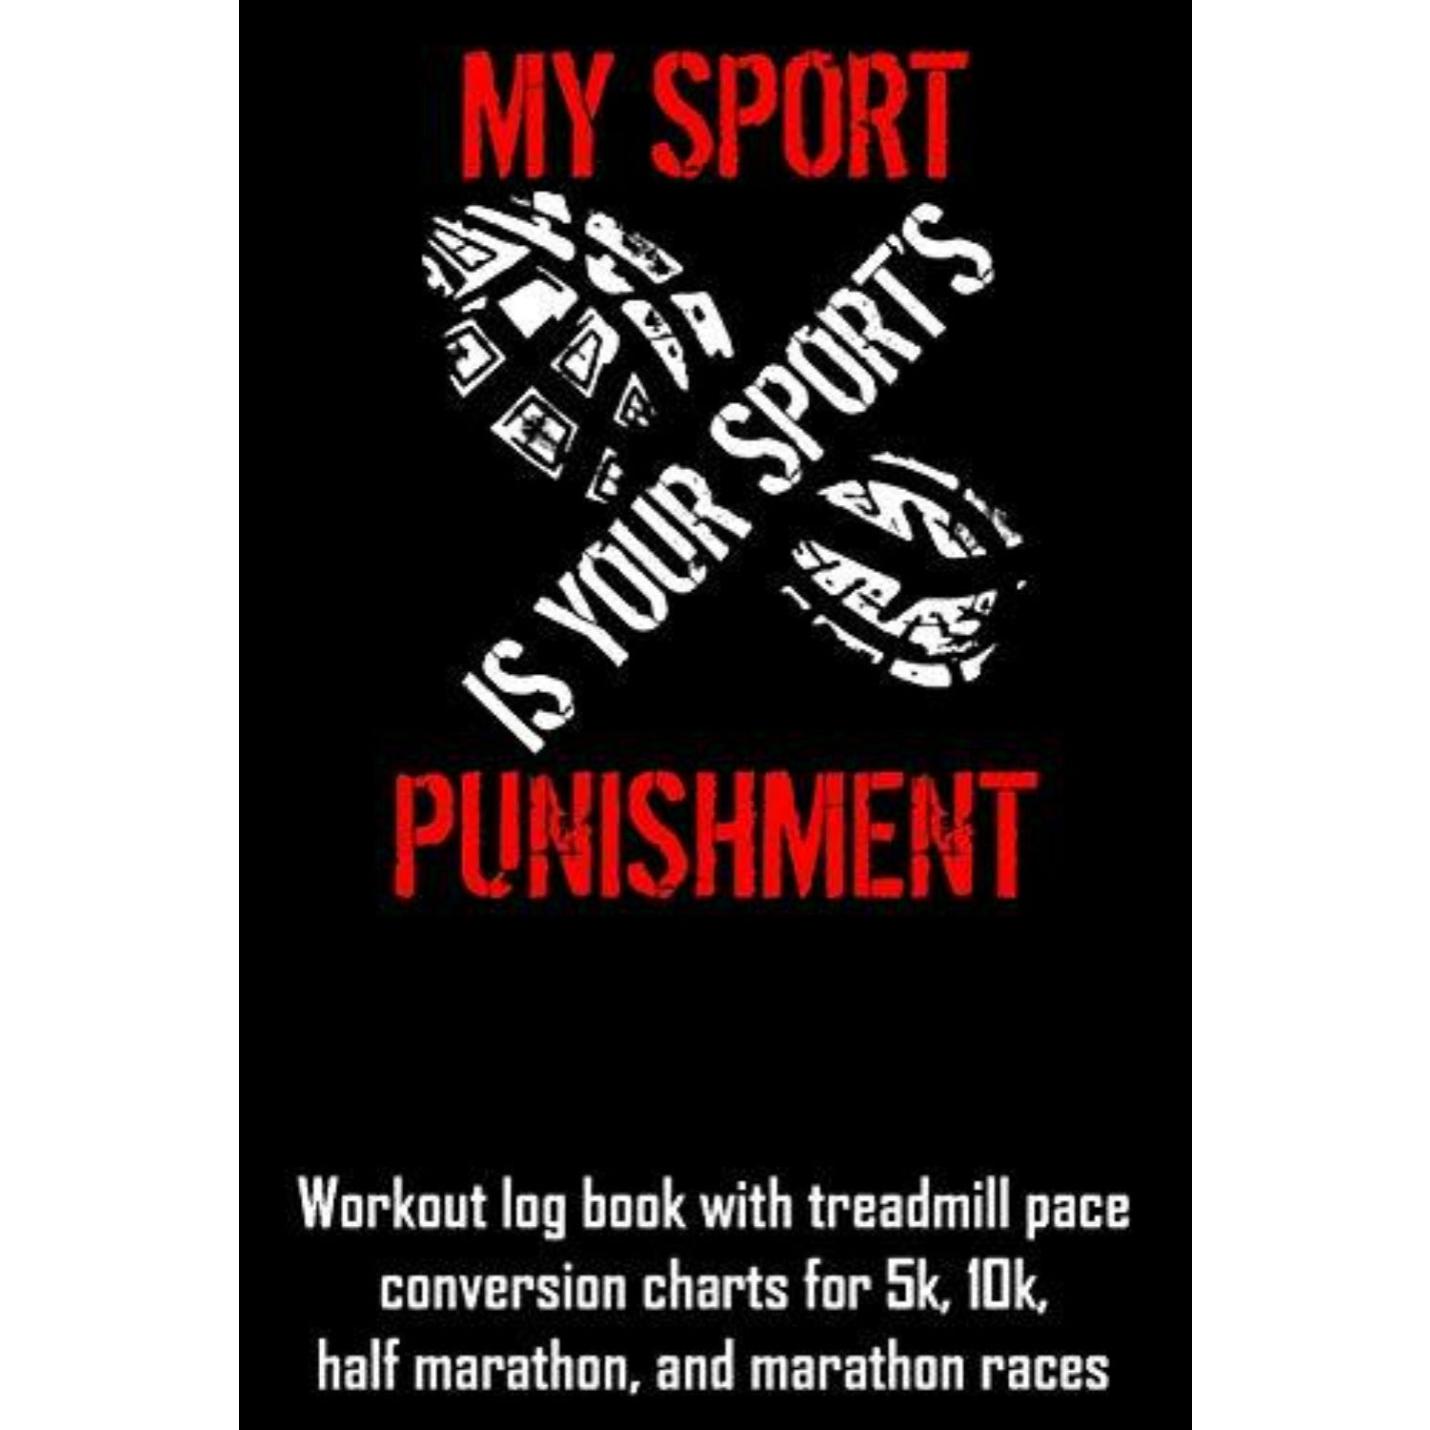 My Sport Is Your Sport's Punishment: Workout Log Book with Treadmill Pace Conversion Charts - happygetfit.com